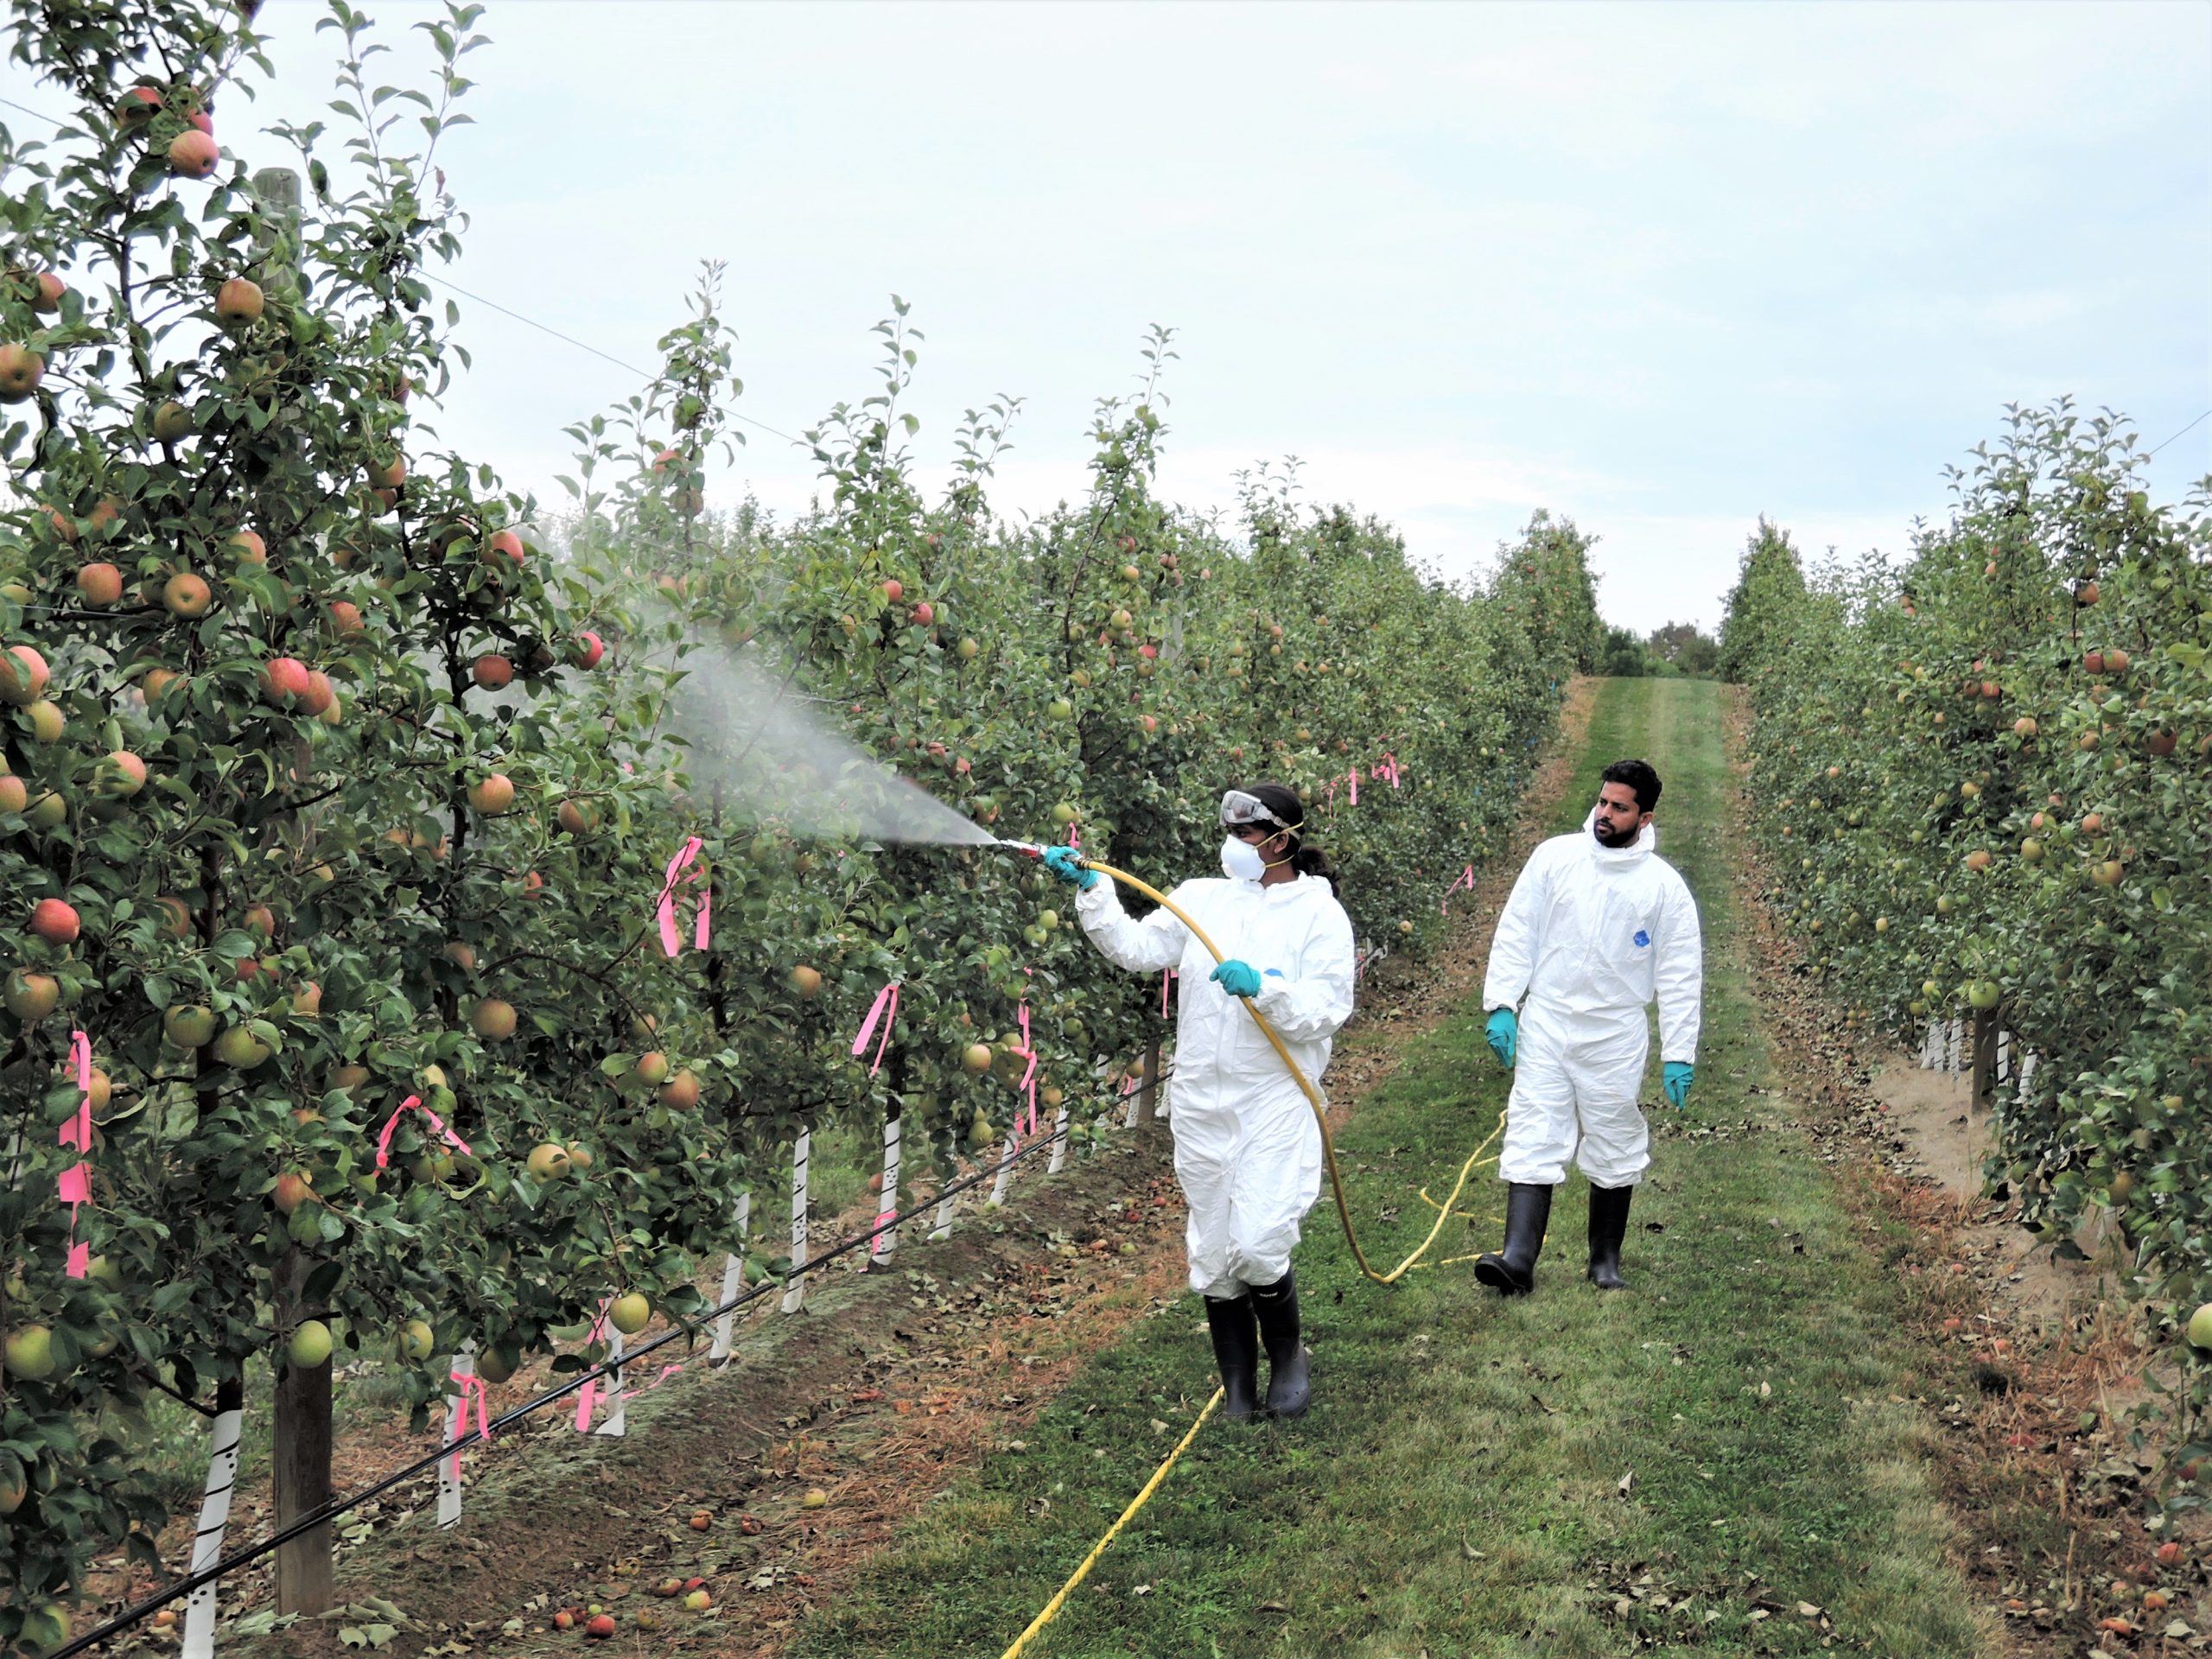 Karthika and assistant spray hexanal in an apple orchard.